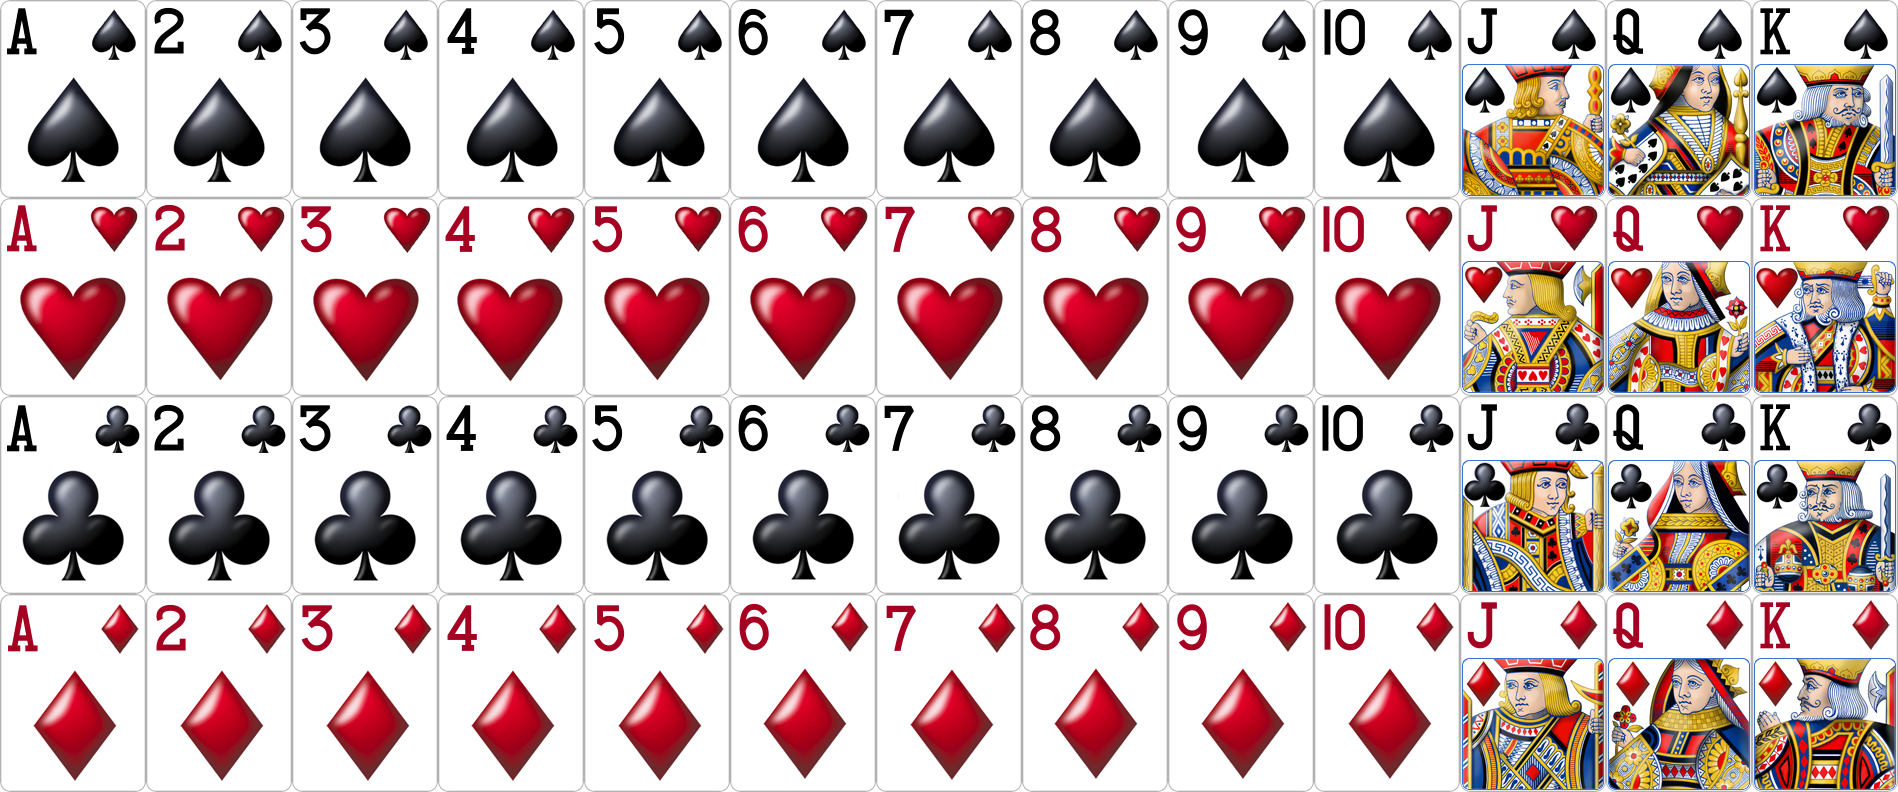 Huge Spider Solitaire - Play Online for Free